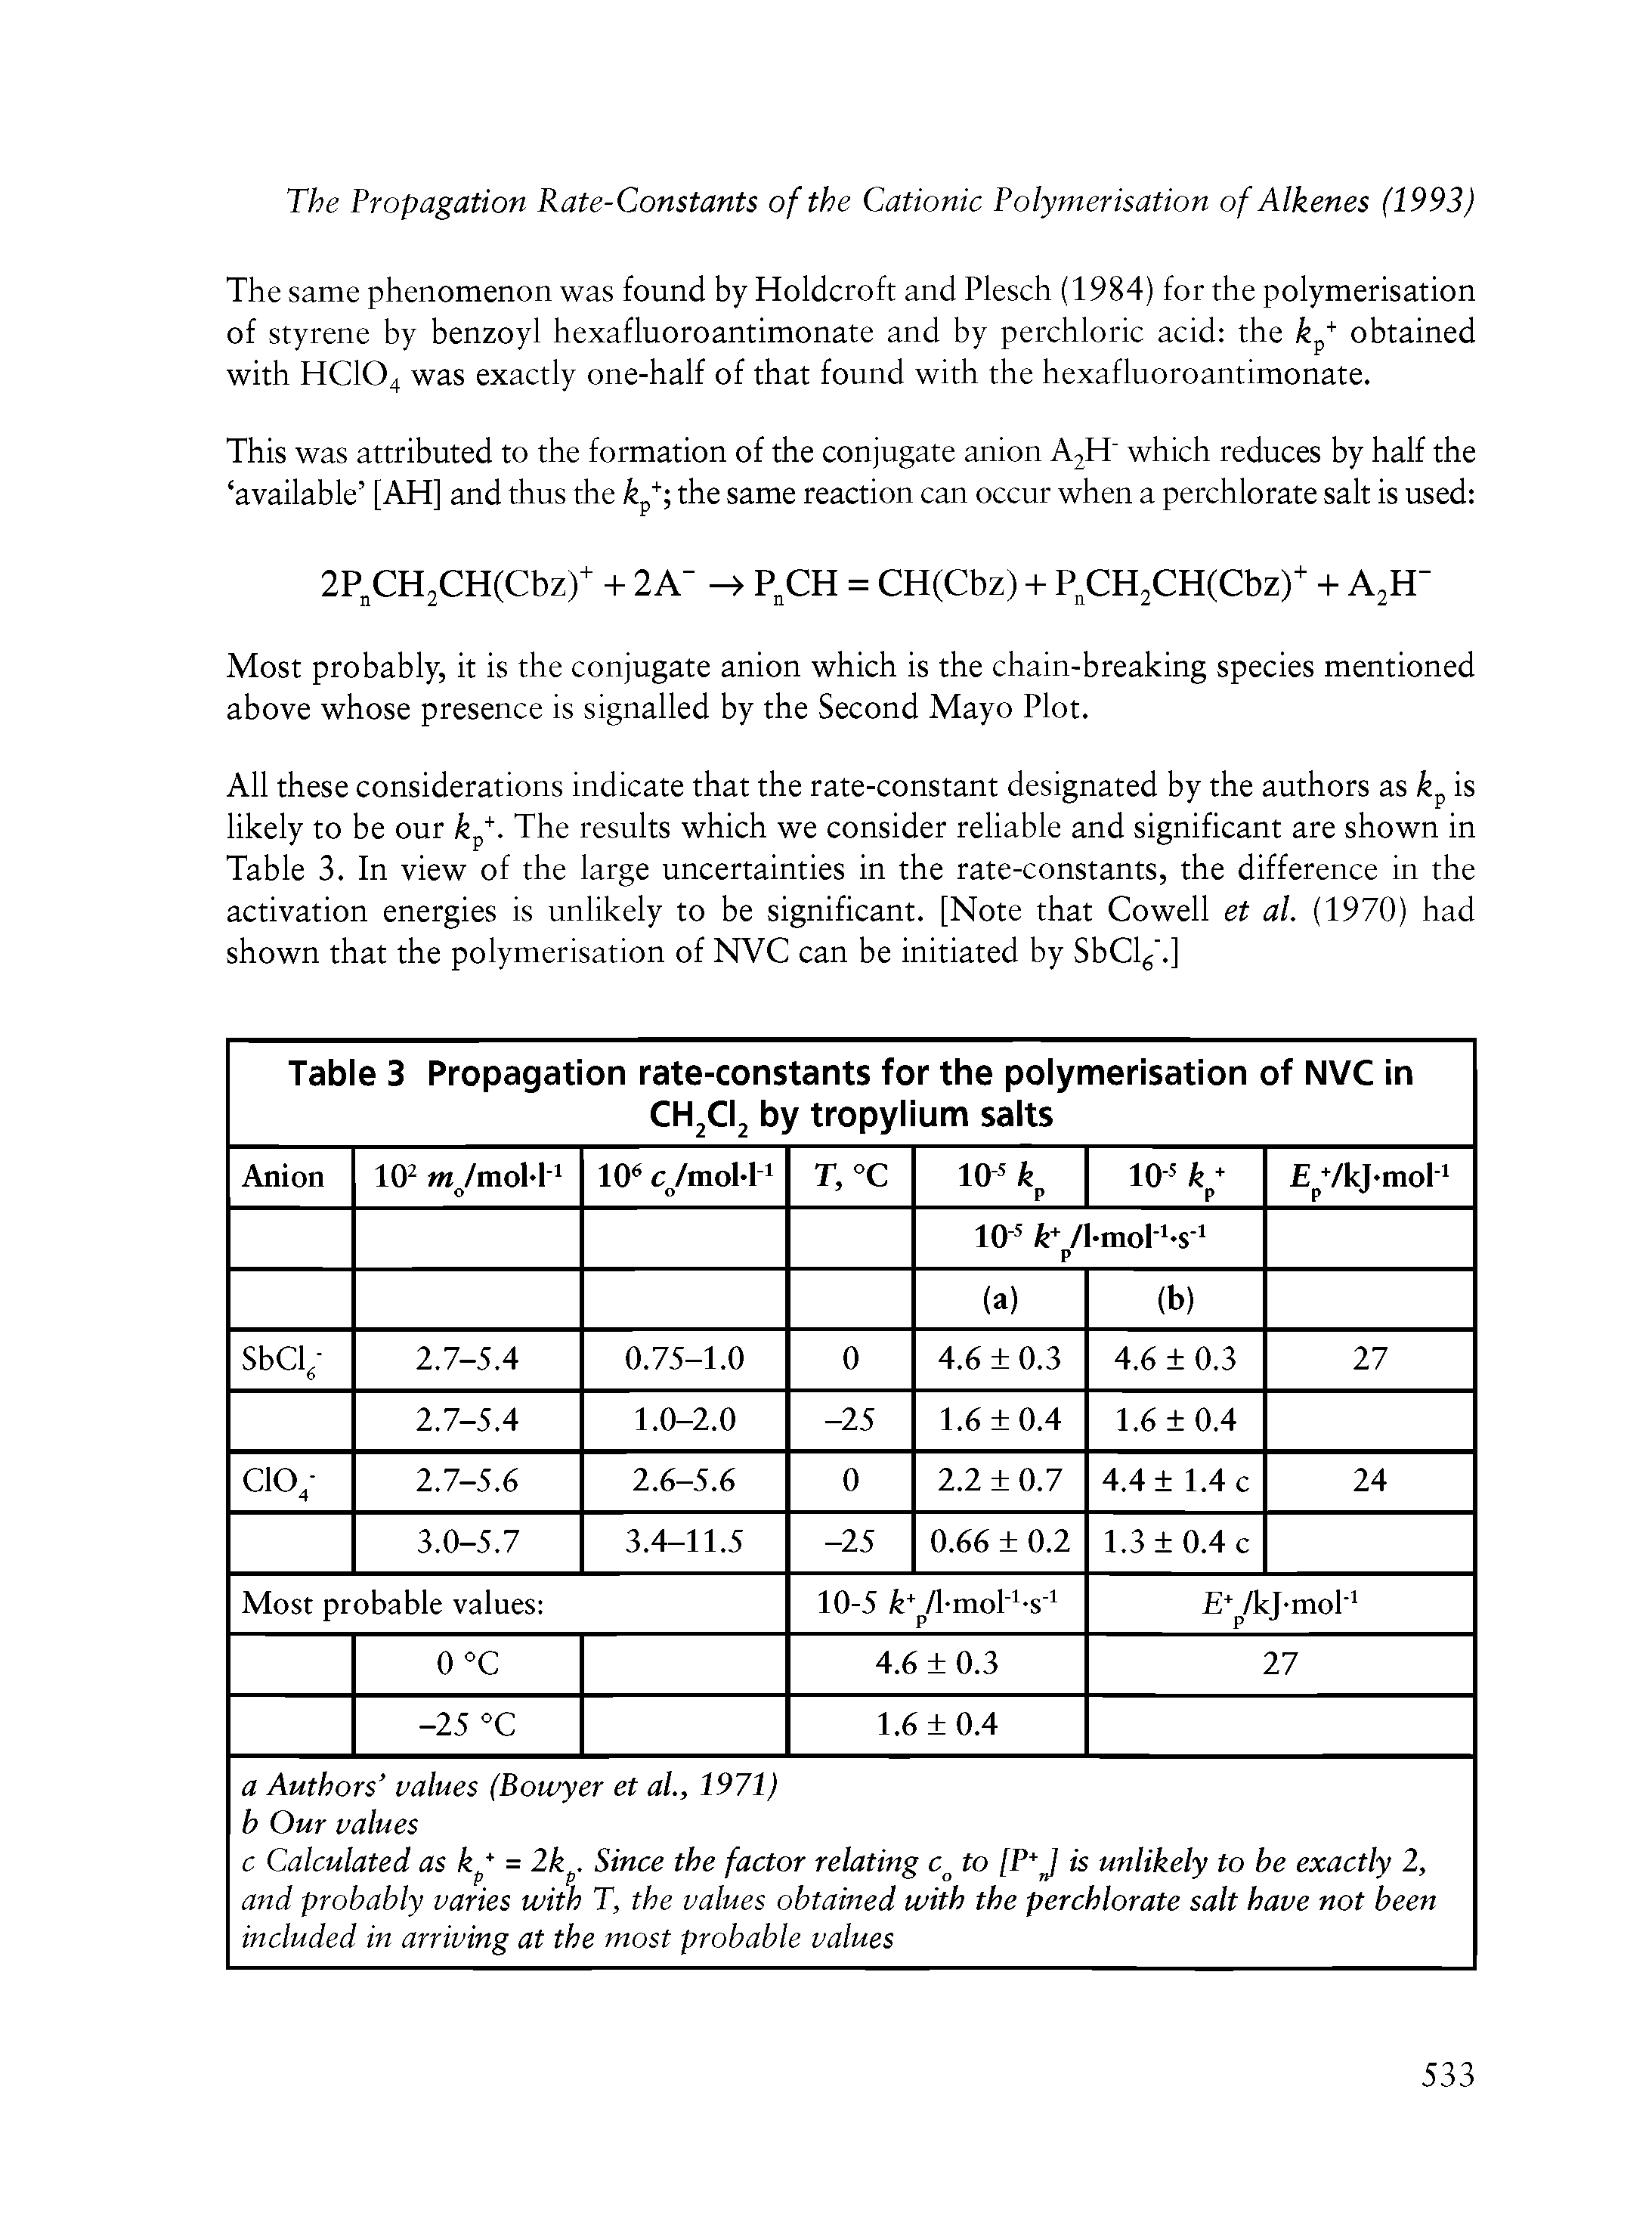 Table 3 Propagation rate-constants for the polymerisation of NVC in CH2CI2 by tropylium salts ...